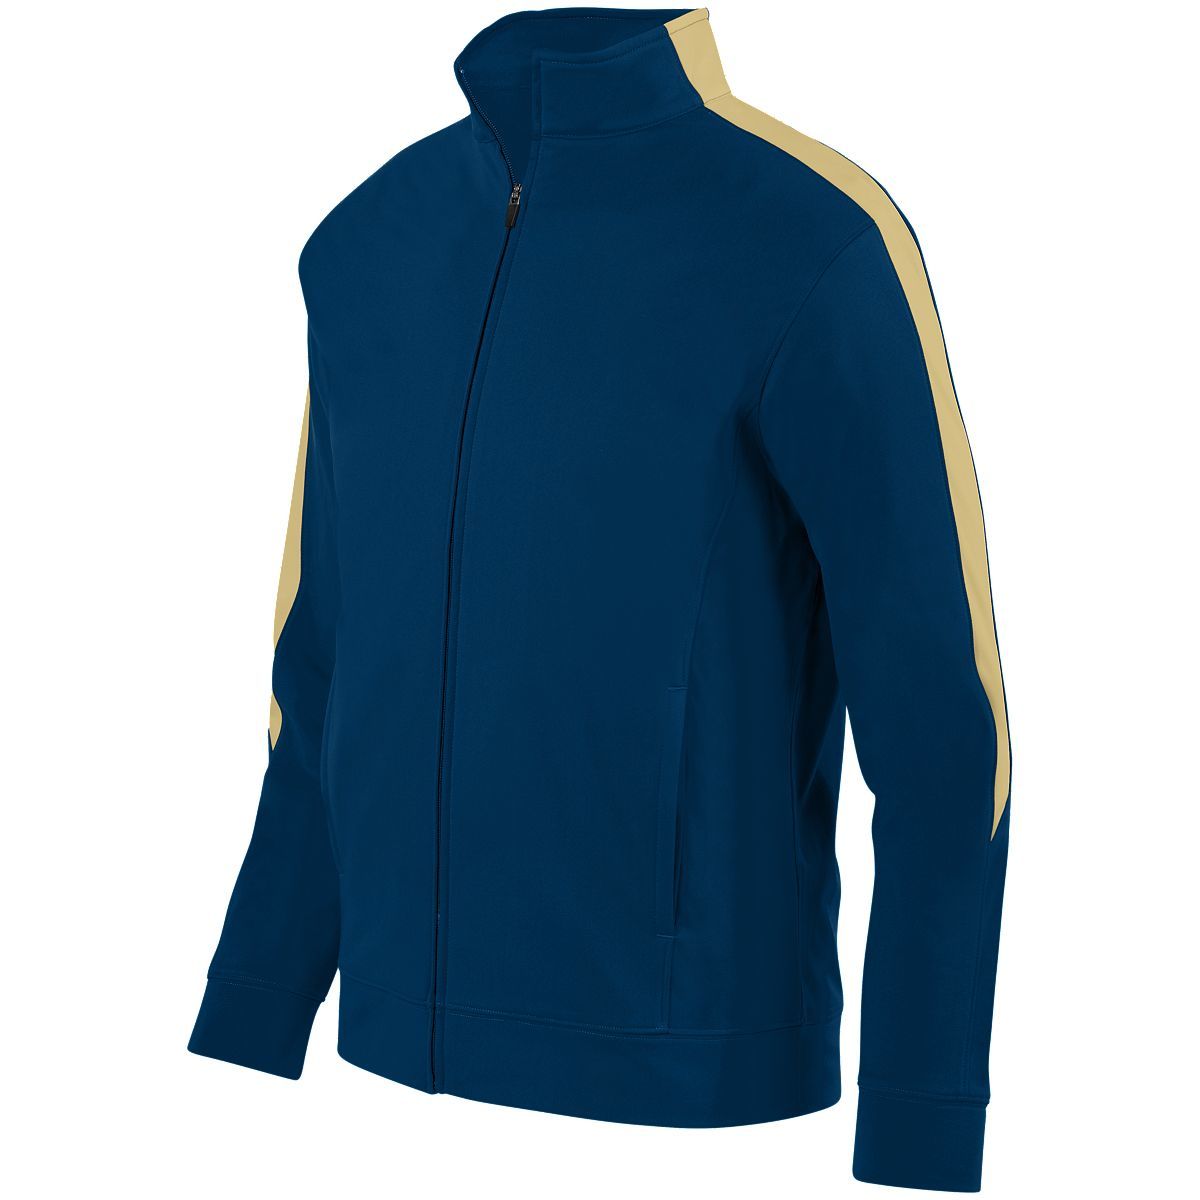 Augusta Sportswear Medalist Jacket 2.0 in Navy/Vegas Gold  -Part of the Adult, Adult-Jacket, Augusta-Products, Outerwear product lines at KanaleyCreations.com